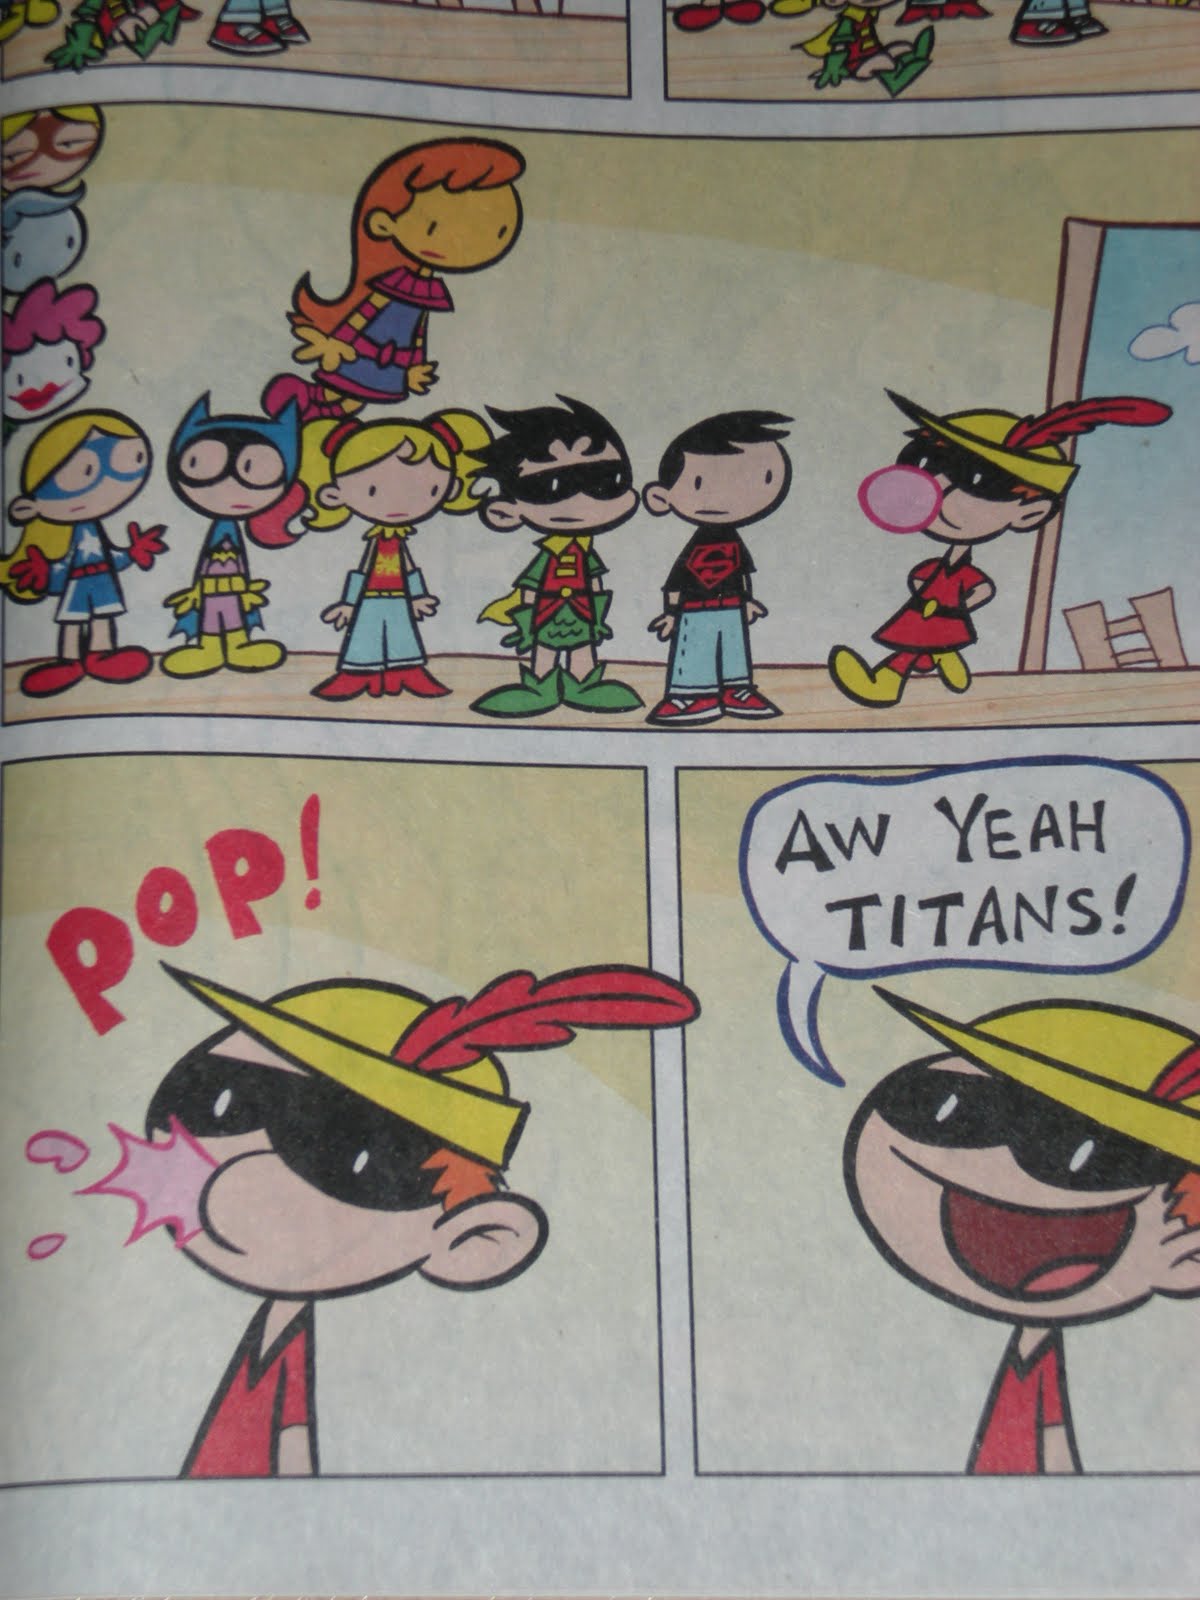 ... yes it s a comic aimed at young children yes it s cartoony but it